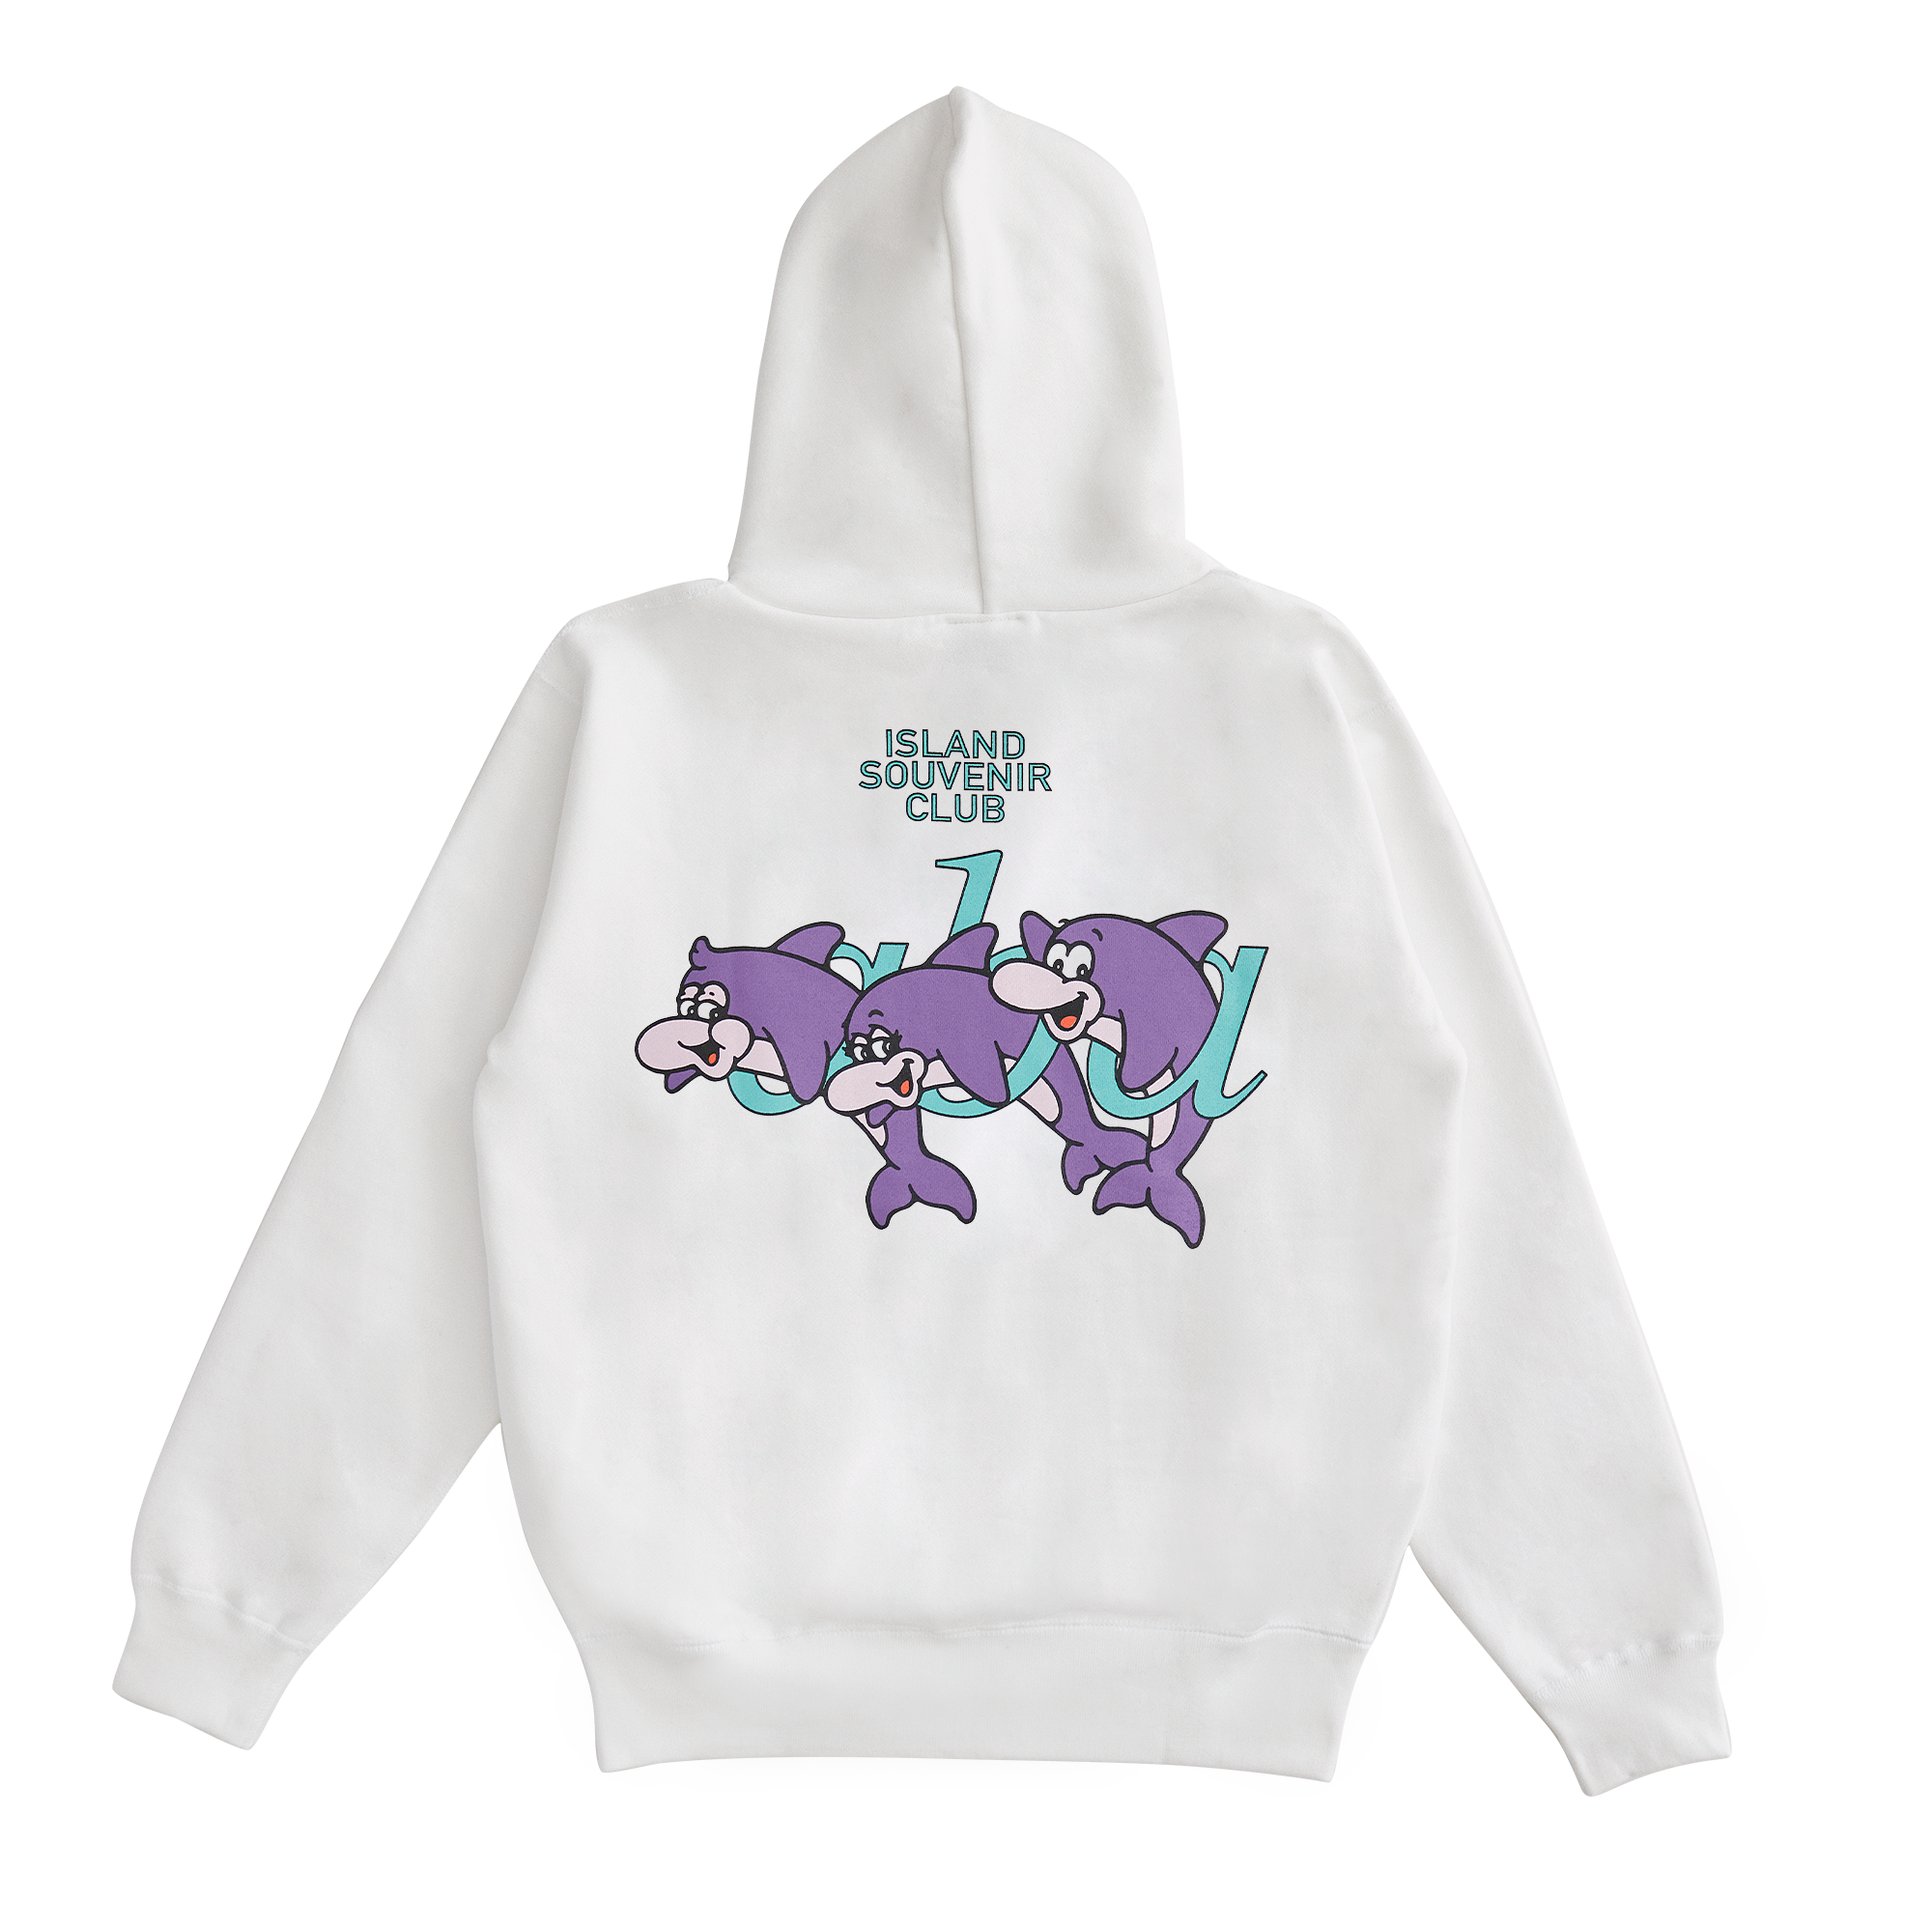 Dolphin Hoodie White